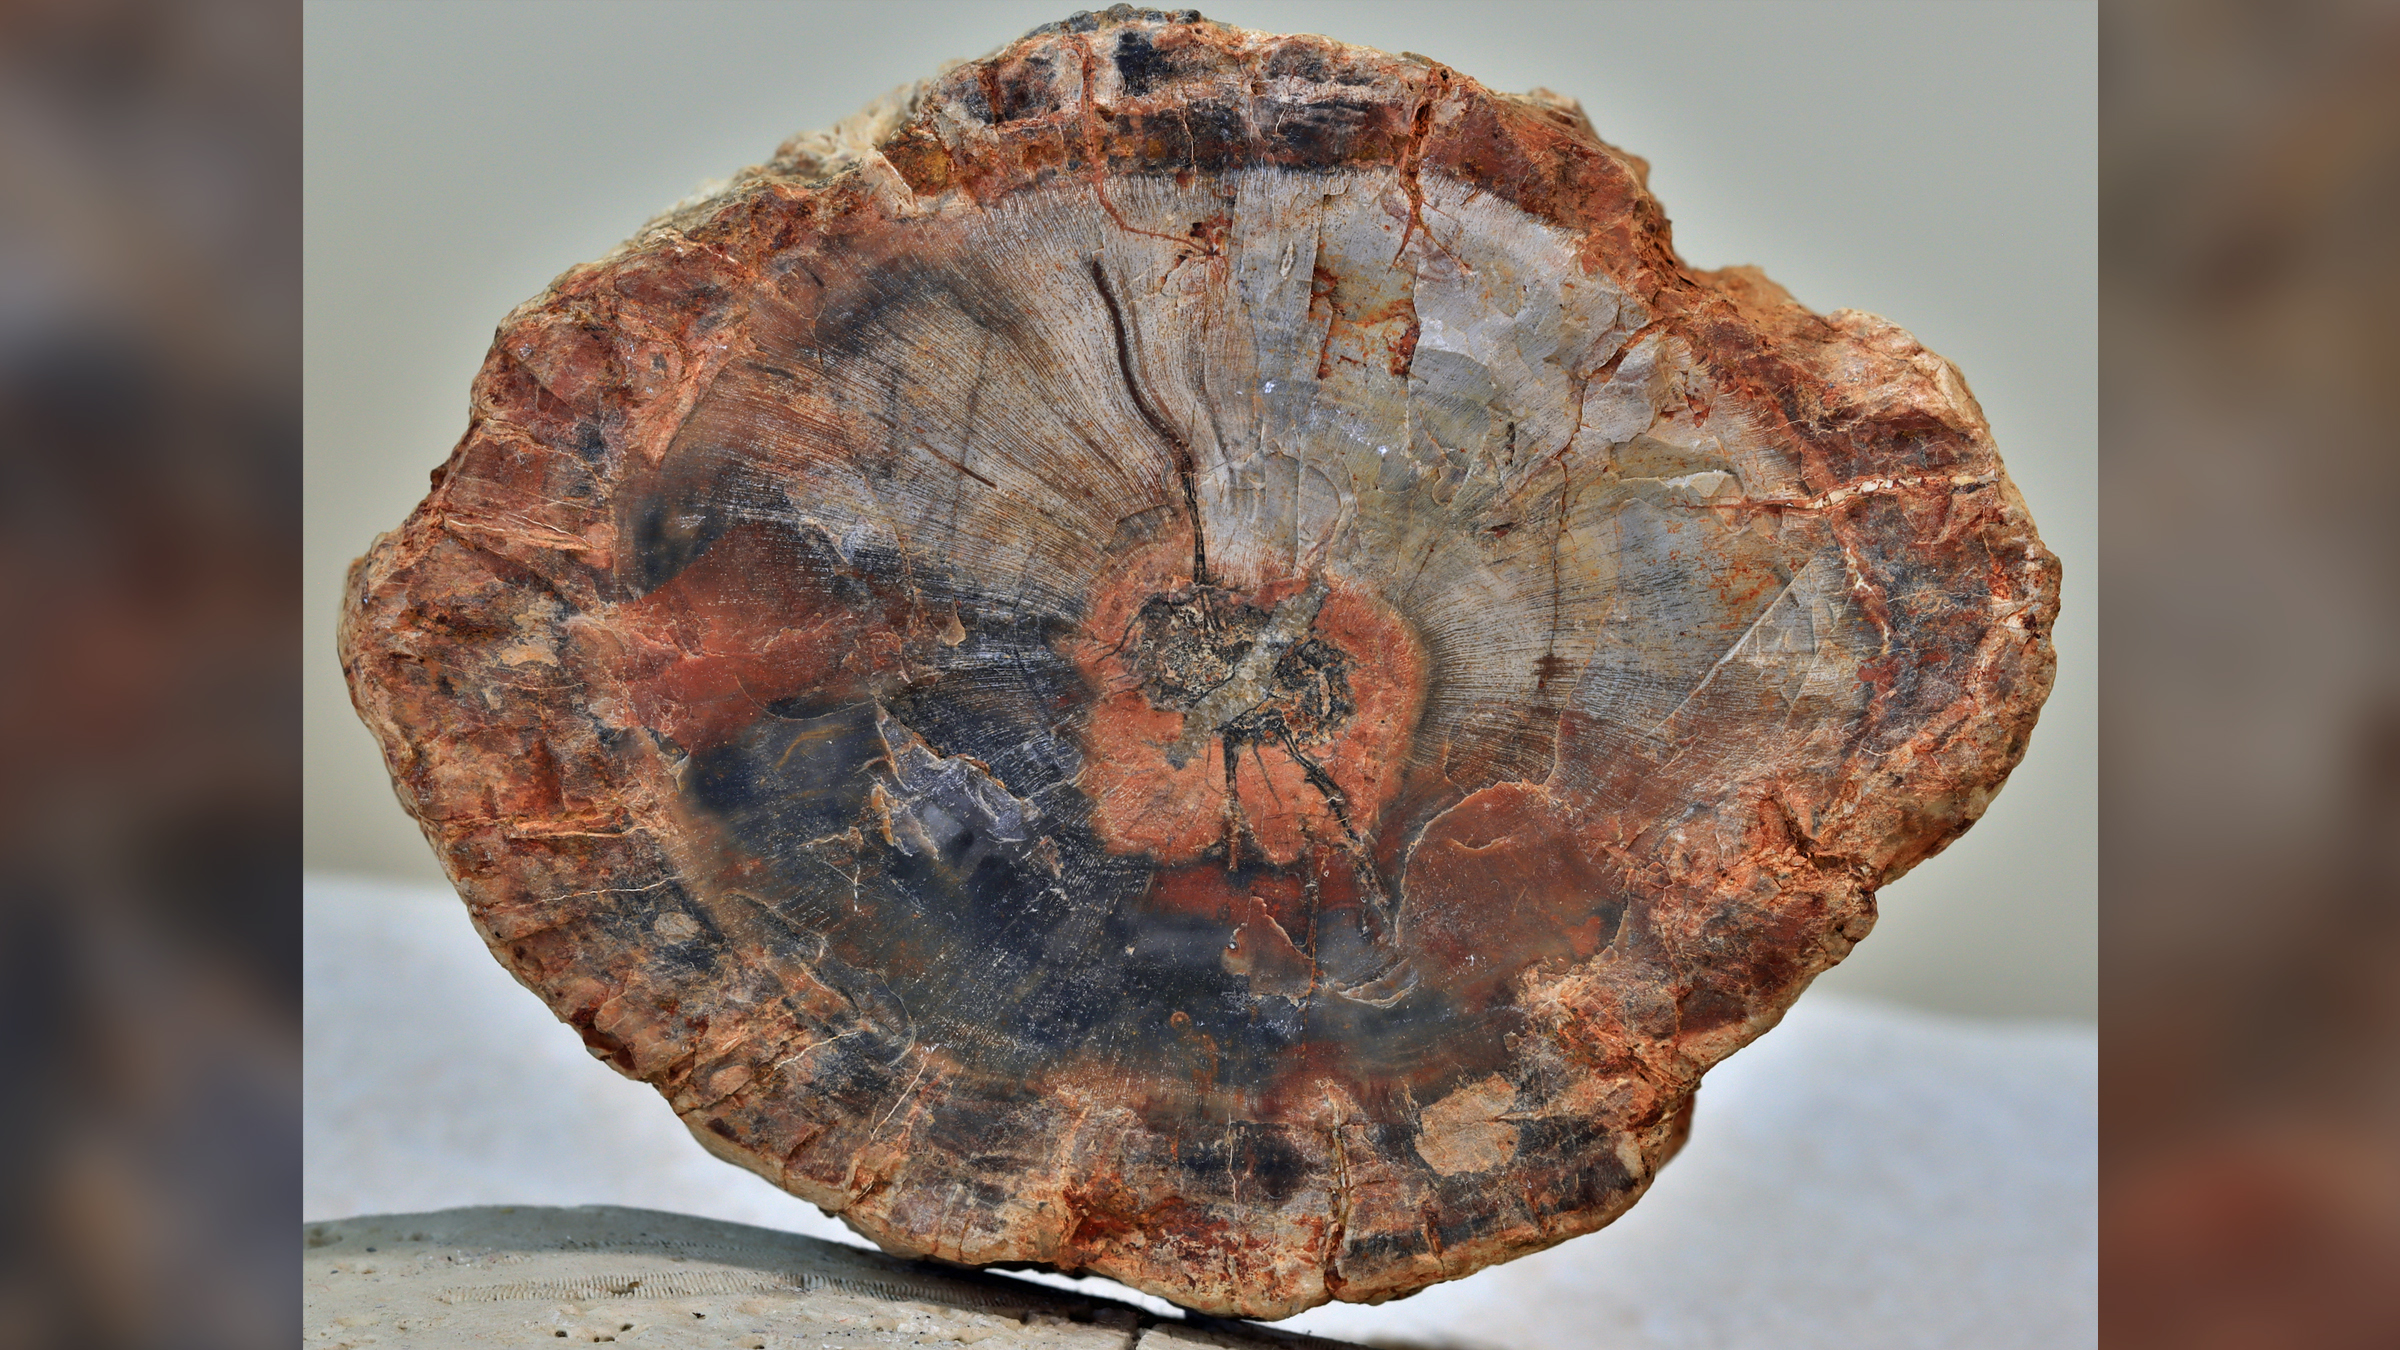 How long does it take to make petrified wood? | Live Science